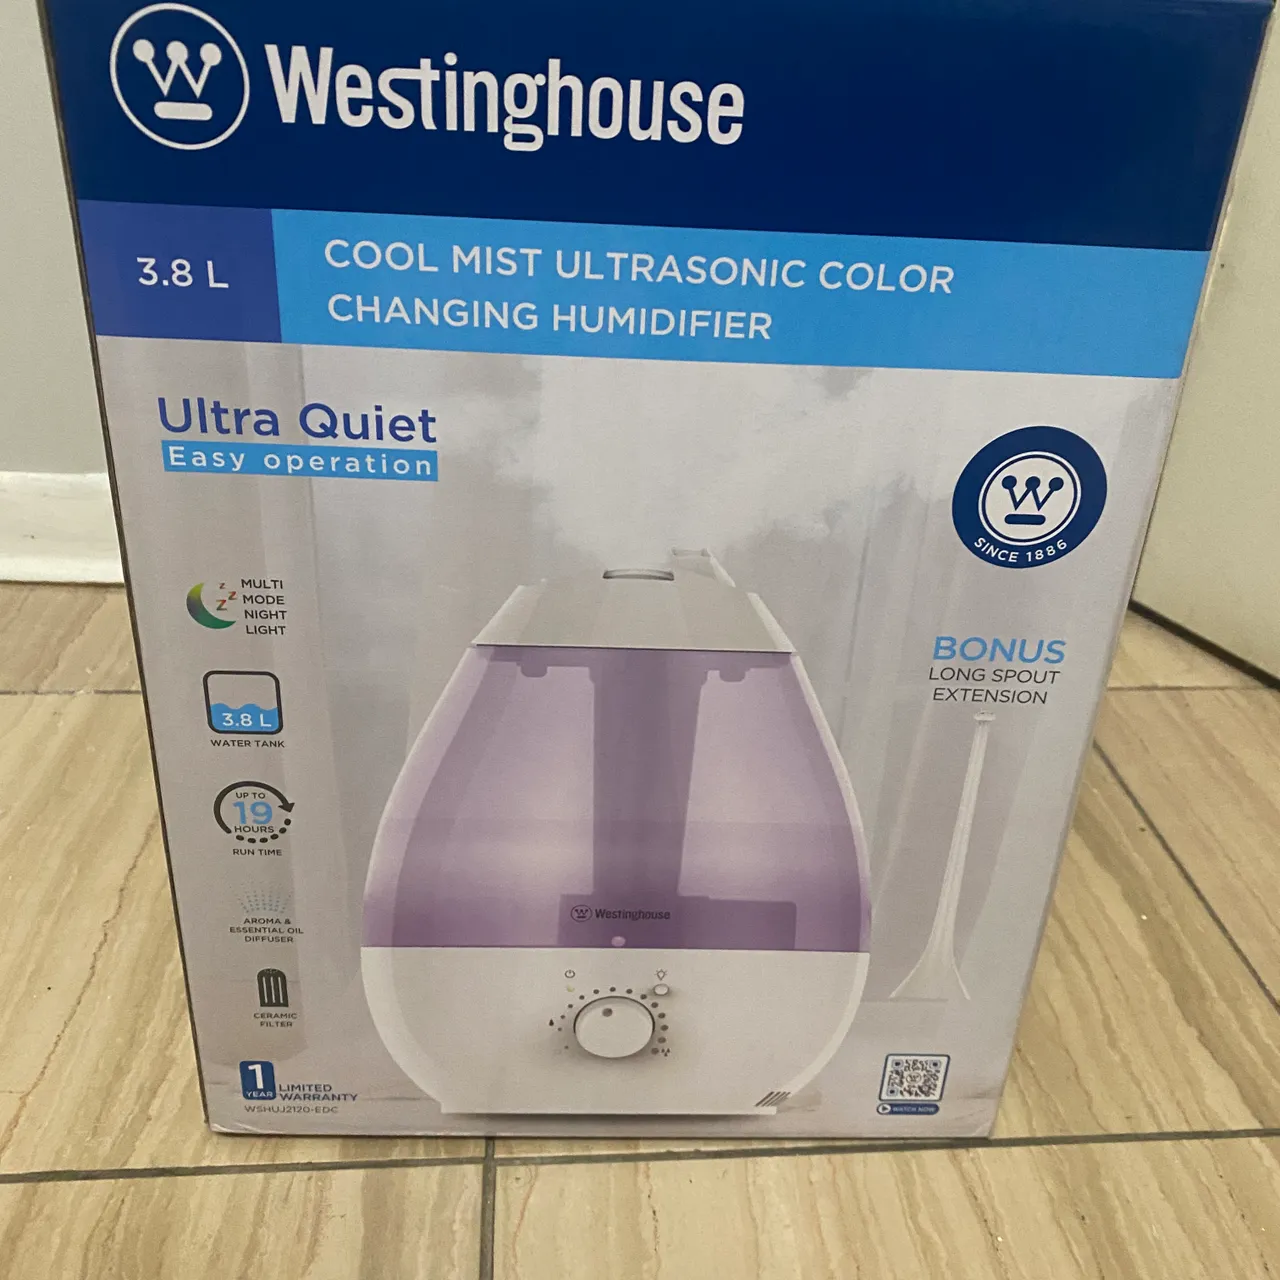 Westinghouse 3.8L Cool Mist Ultrasonic Color Changing Humidifier photo 1